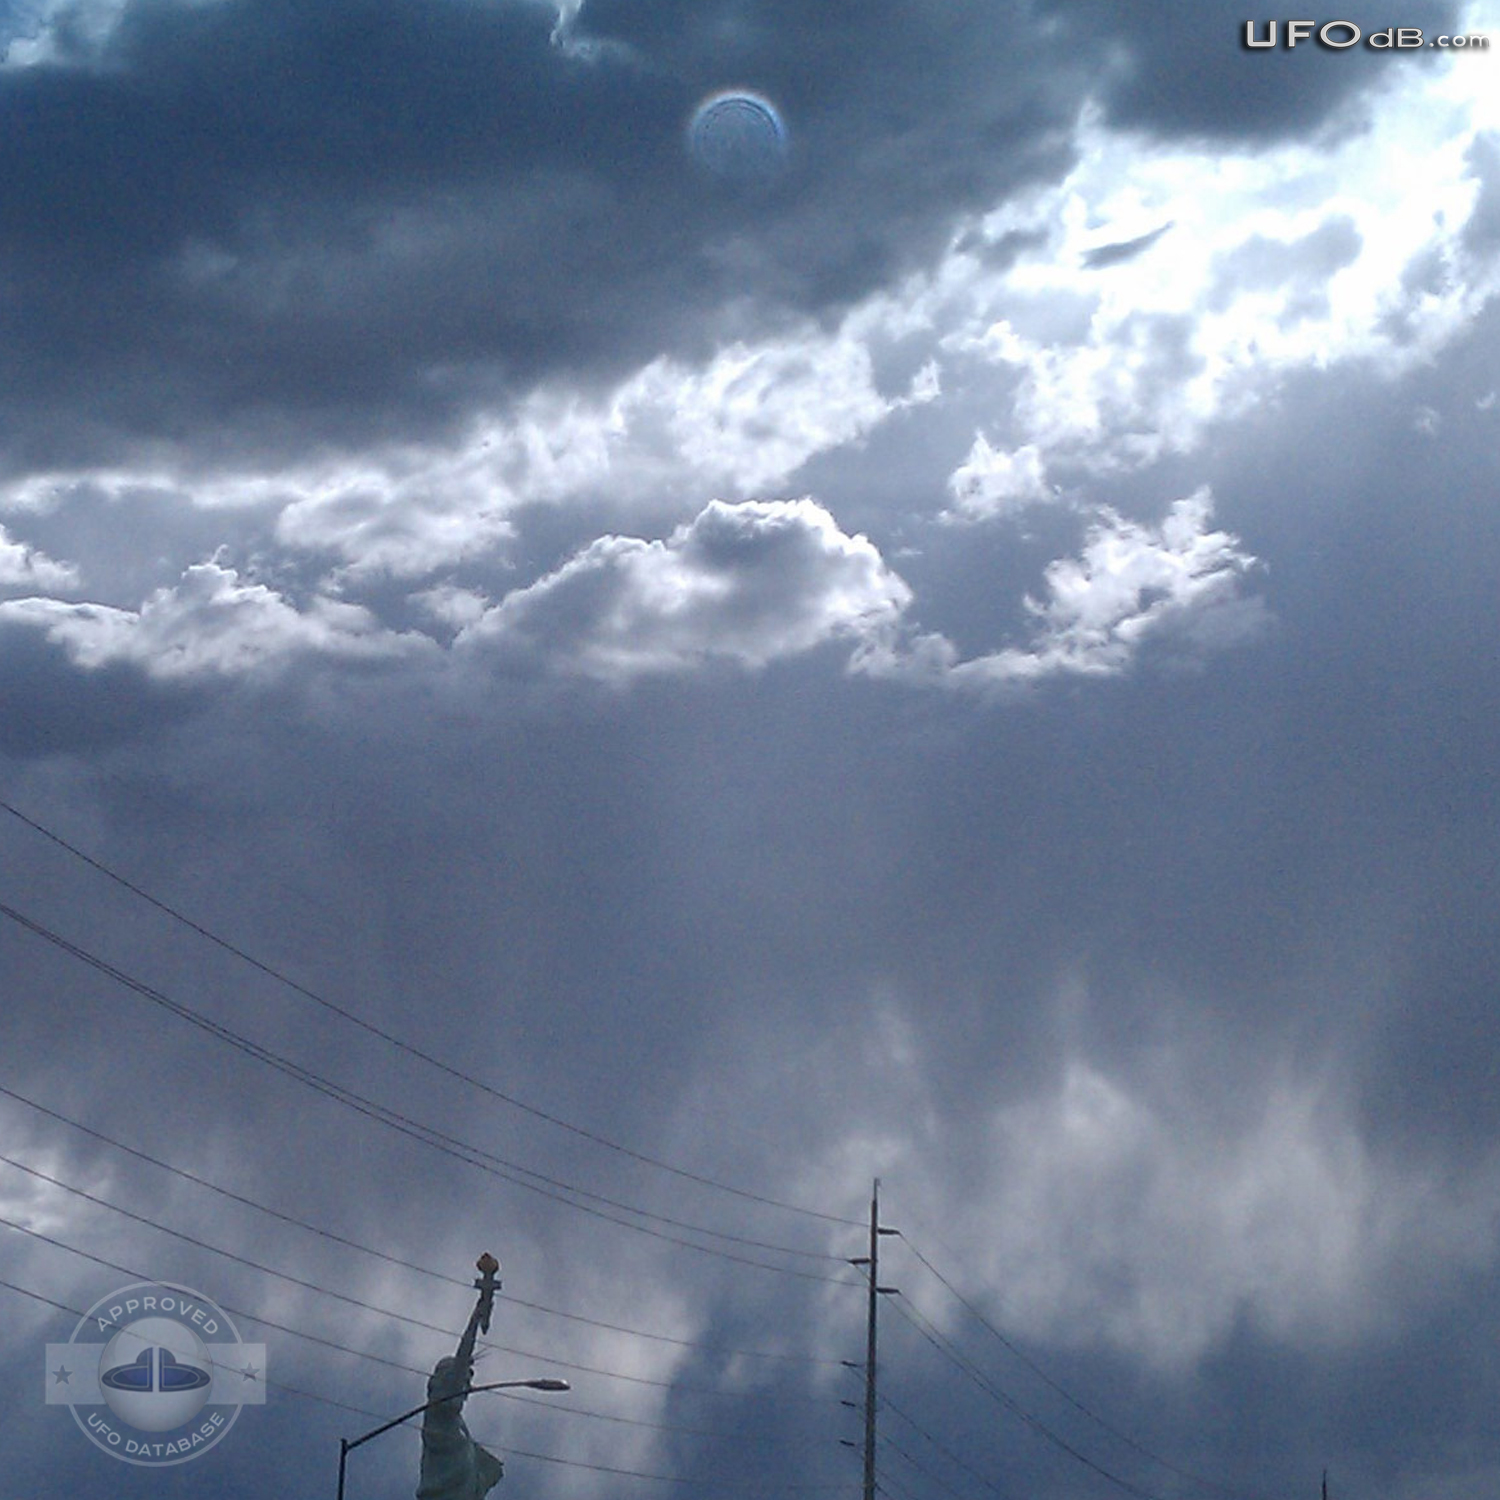 Large UFO coming through a Cloud in Las Vegas Nevada USA | May 13 2011 UFO Picture #334-2